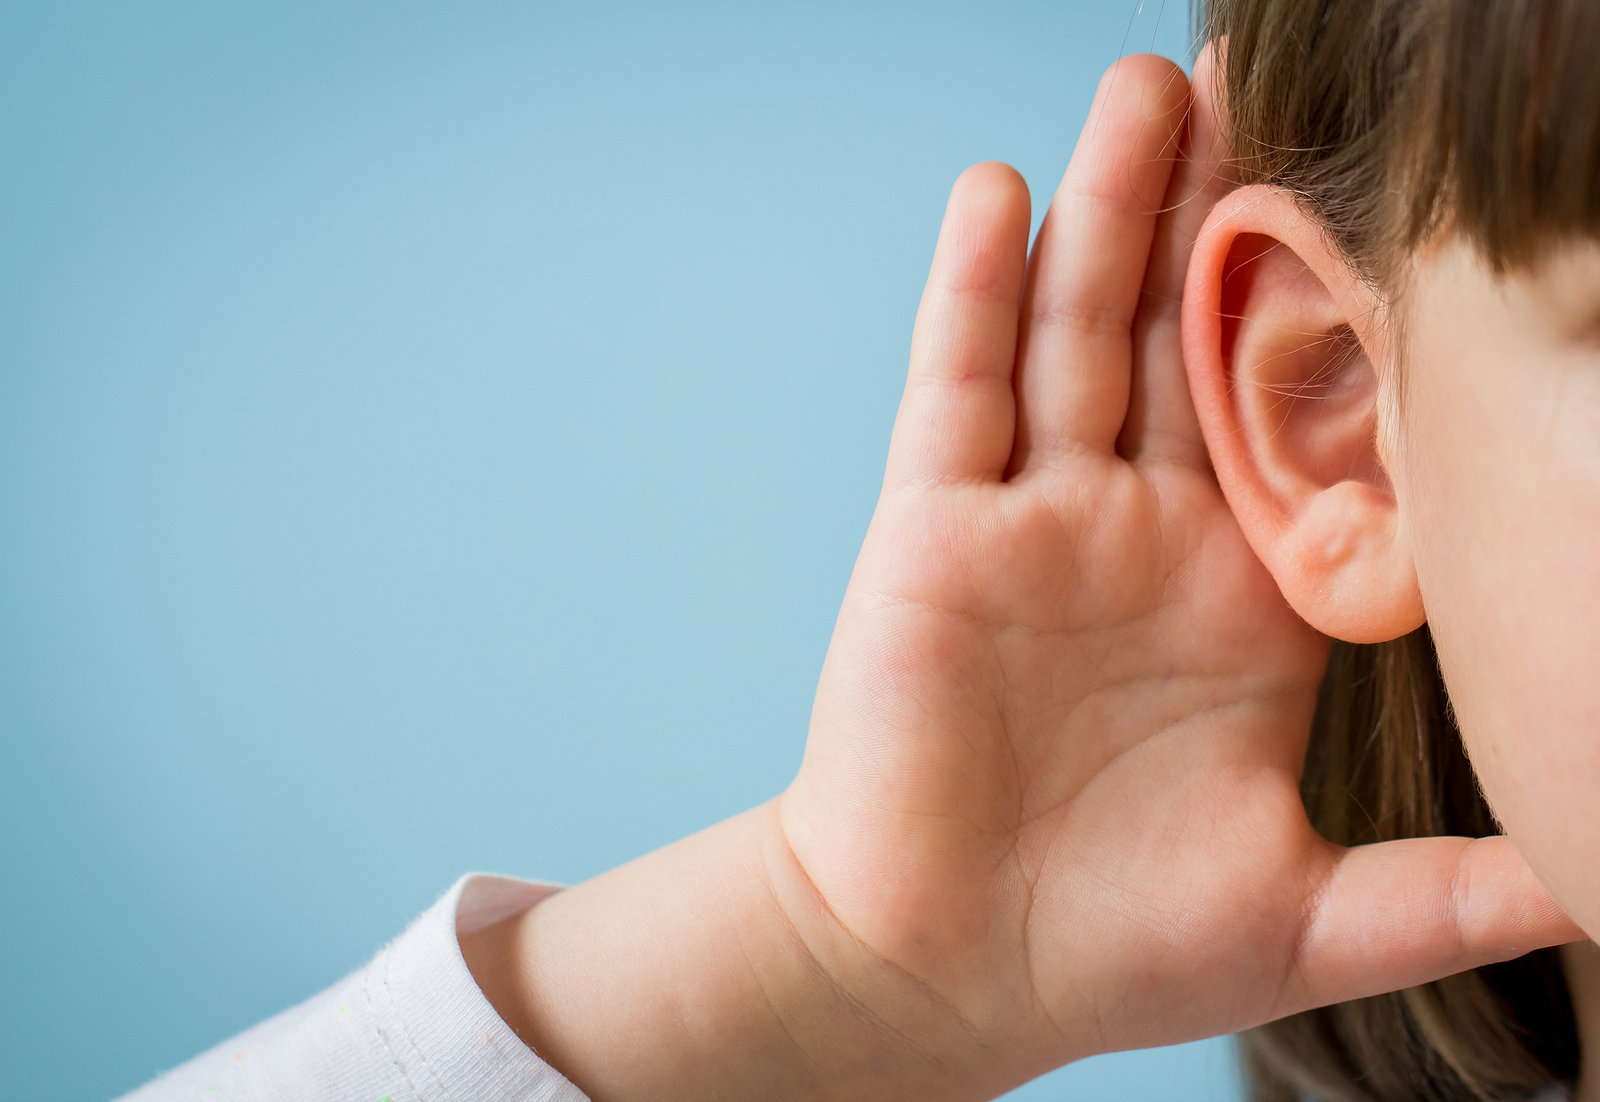 book hearing test - Child with hearing problem